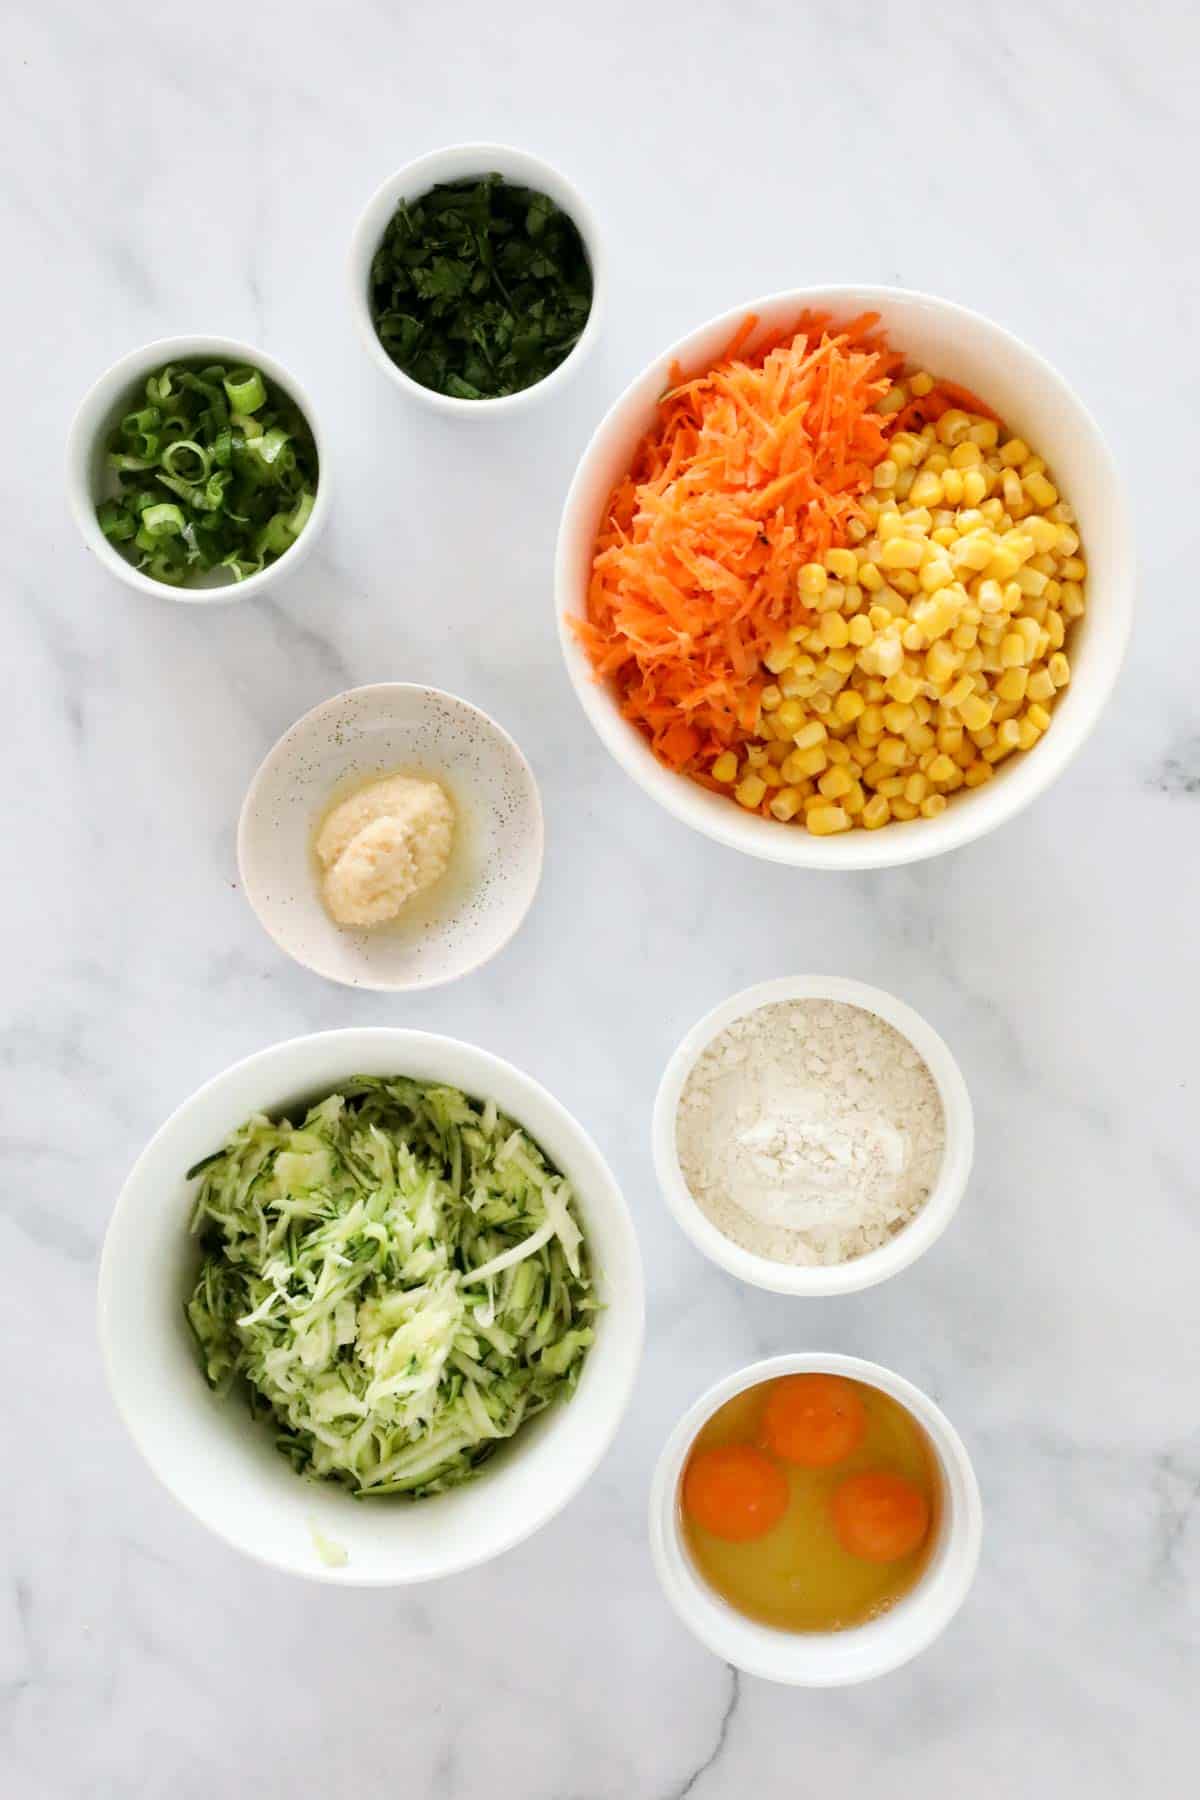 The ingredients for vegetable fritters.